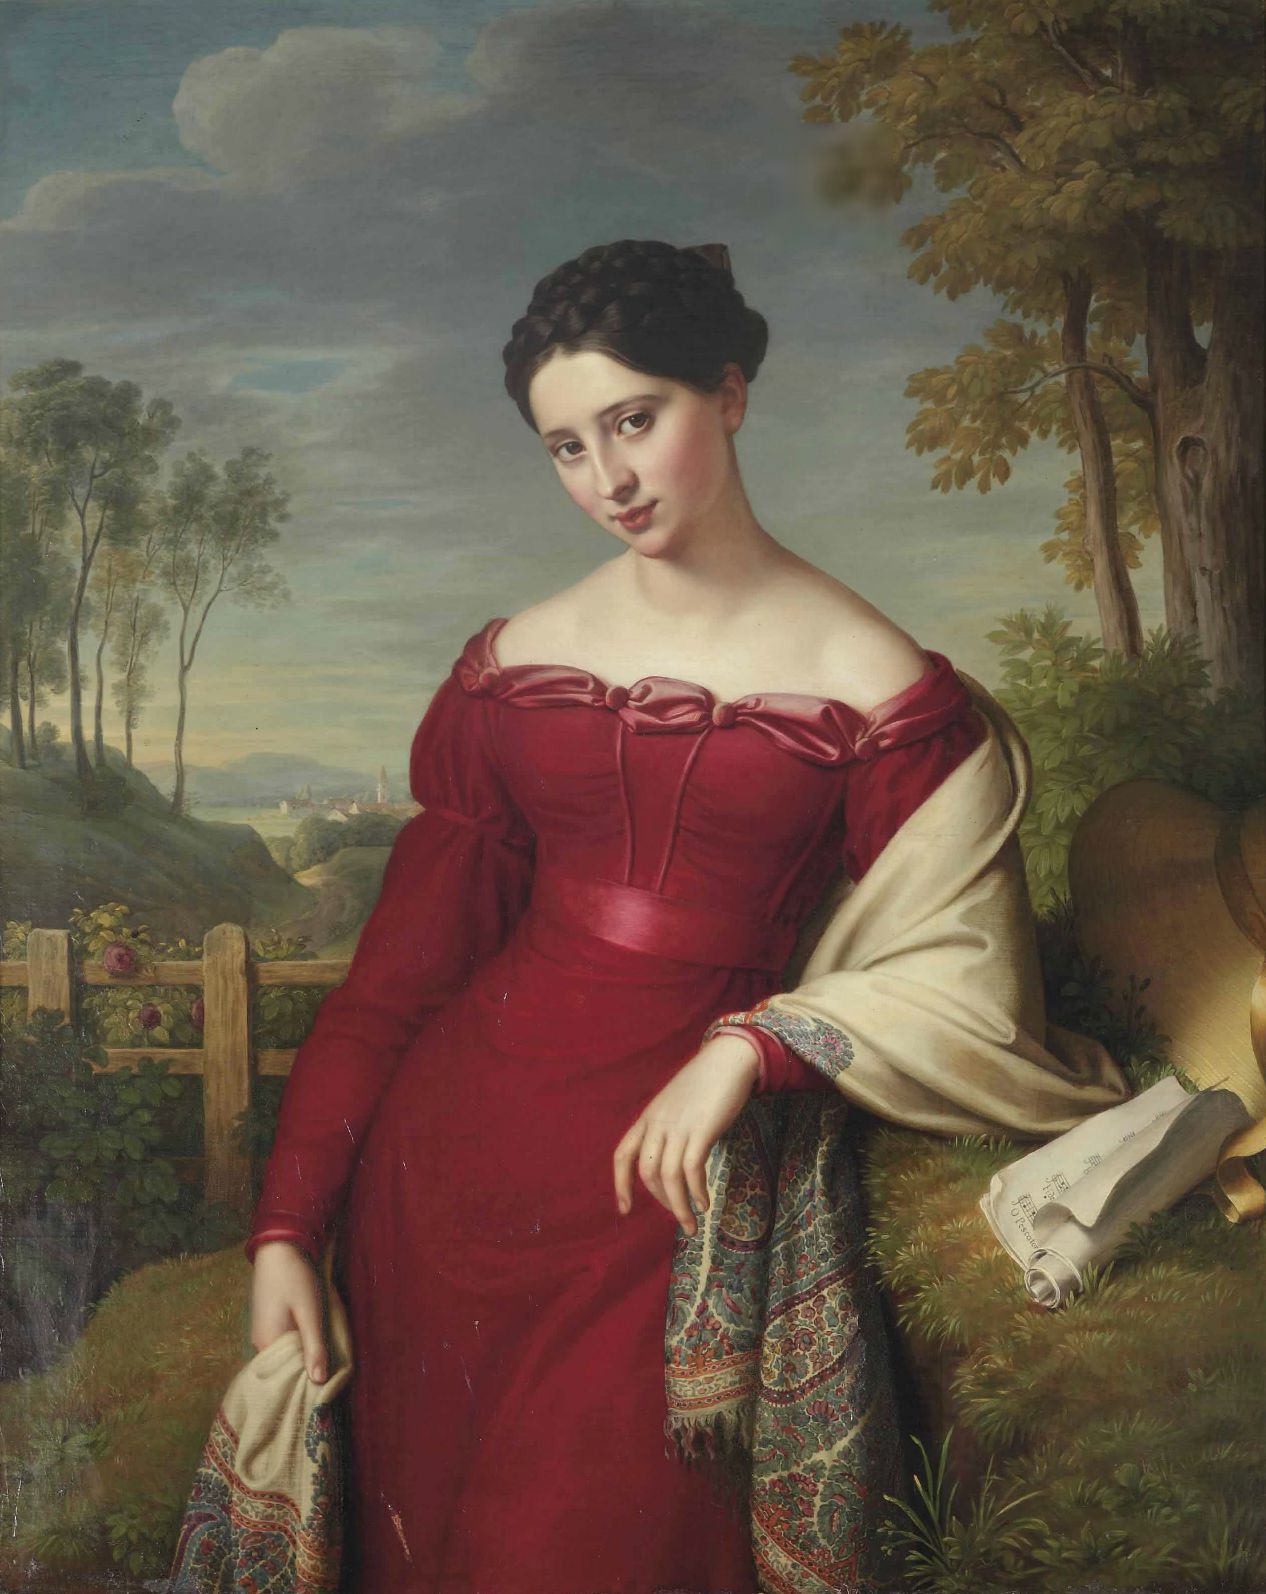 File:Leybold Portrait of a Young Lady 1824.jpg - Wikimedia Commons